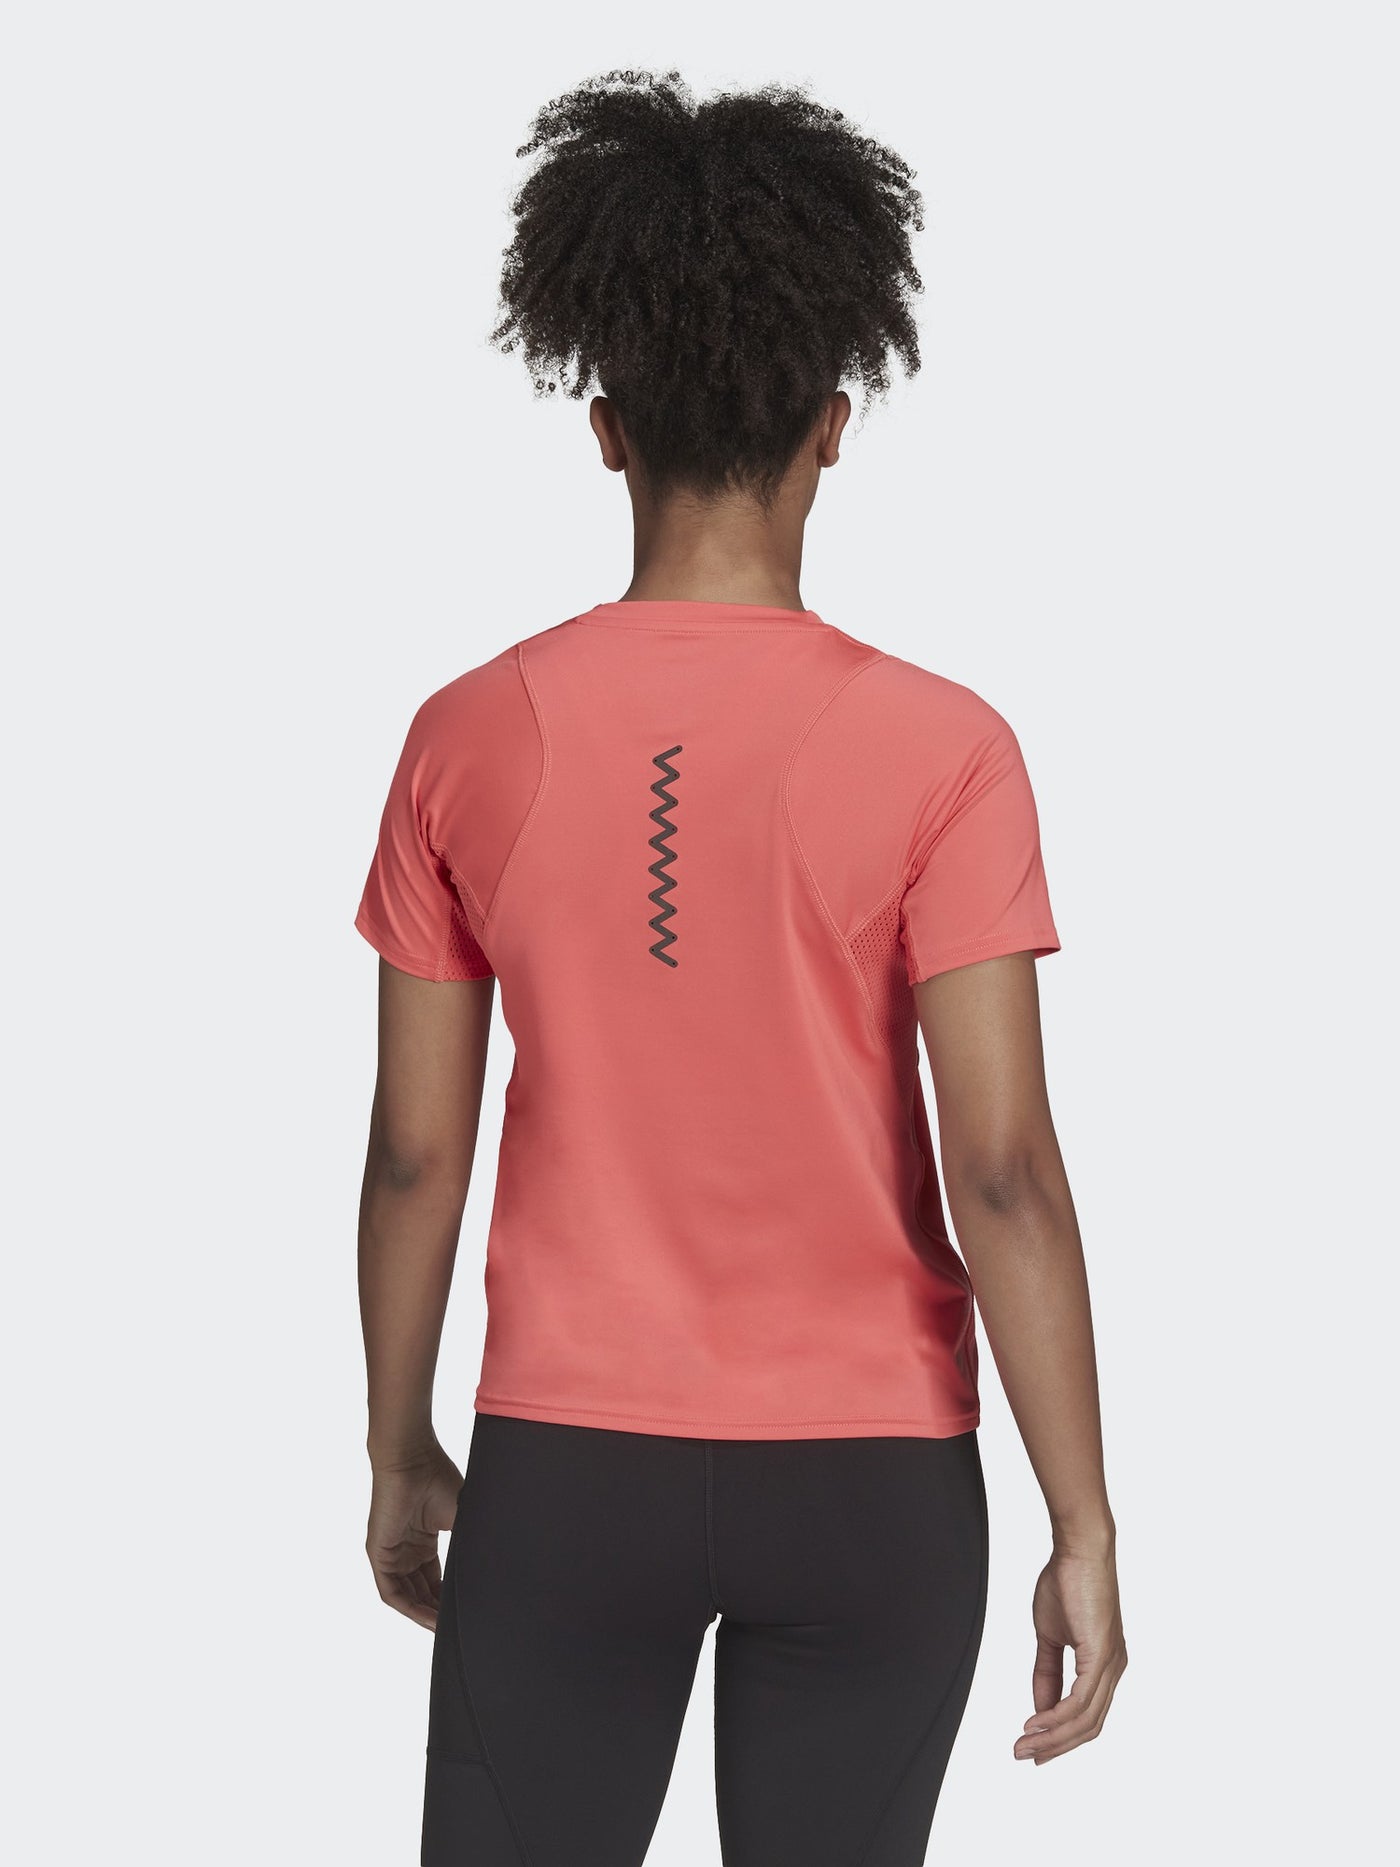 Running T-Shirt - Run Fast  Made With Paley Ocean Plastic